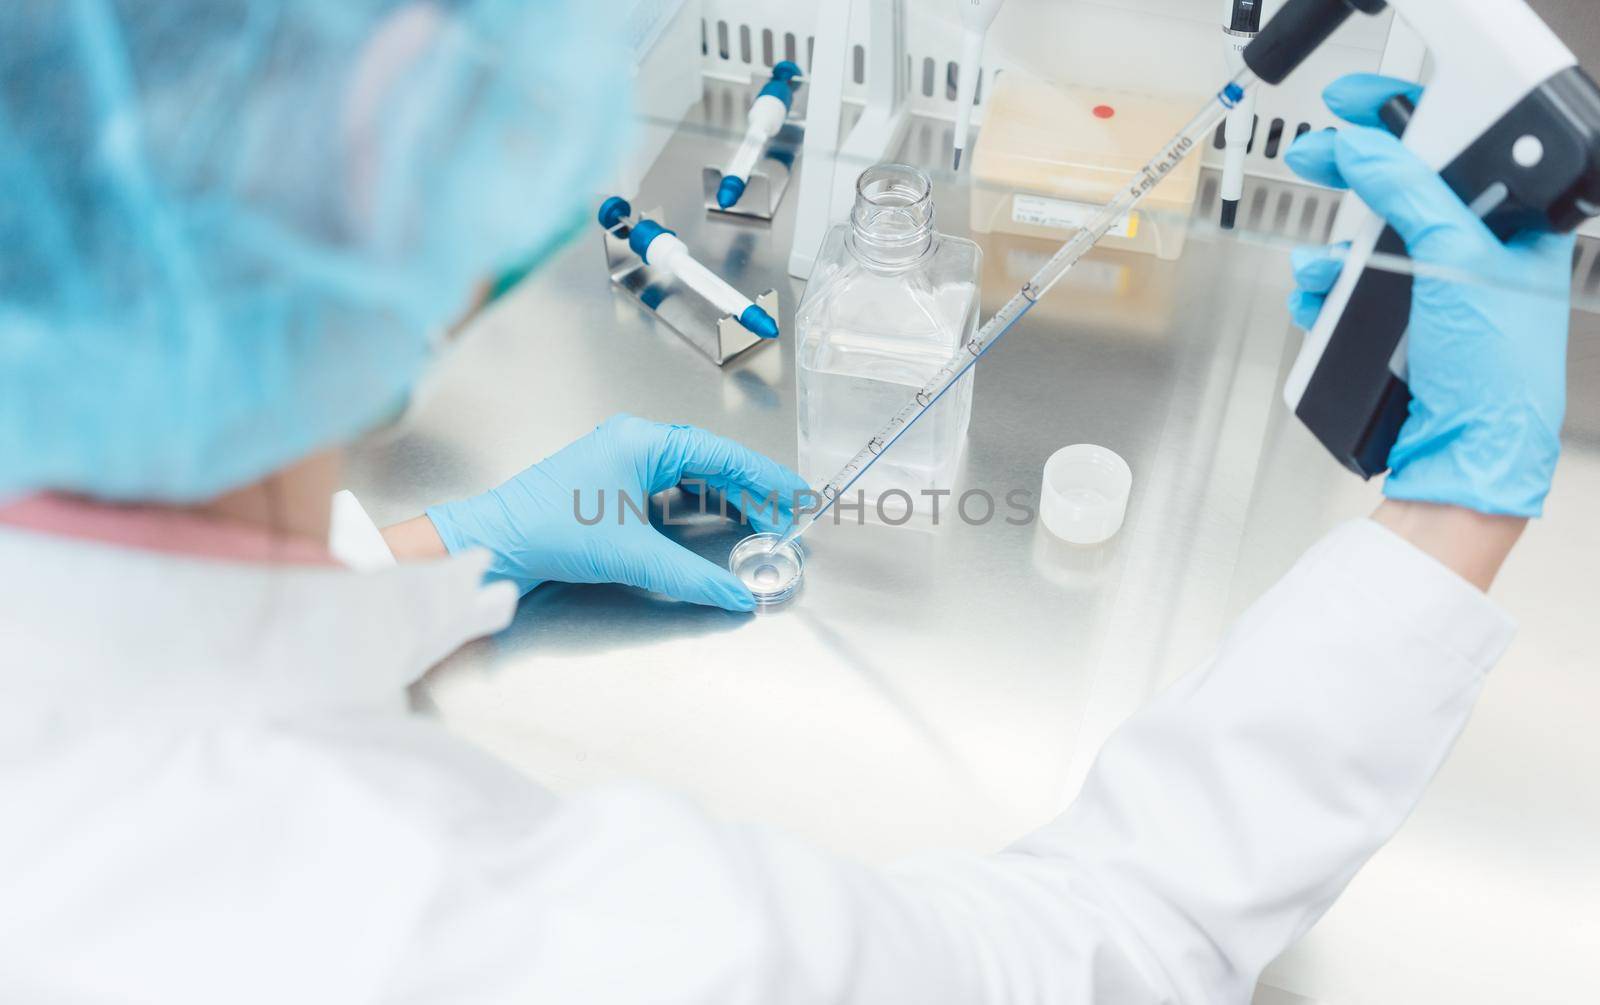 Scientist in lab conducting biotechnological experiment using pipette and petri dish